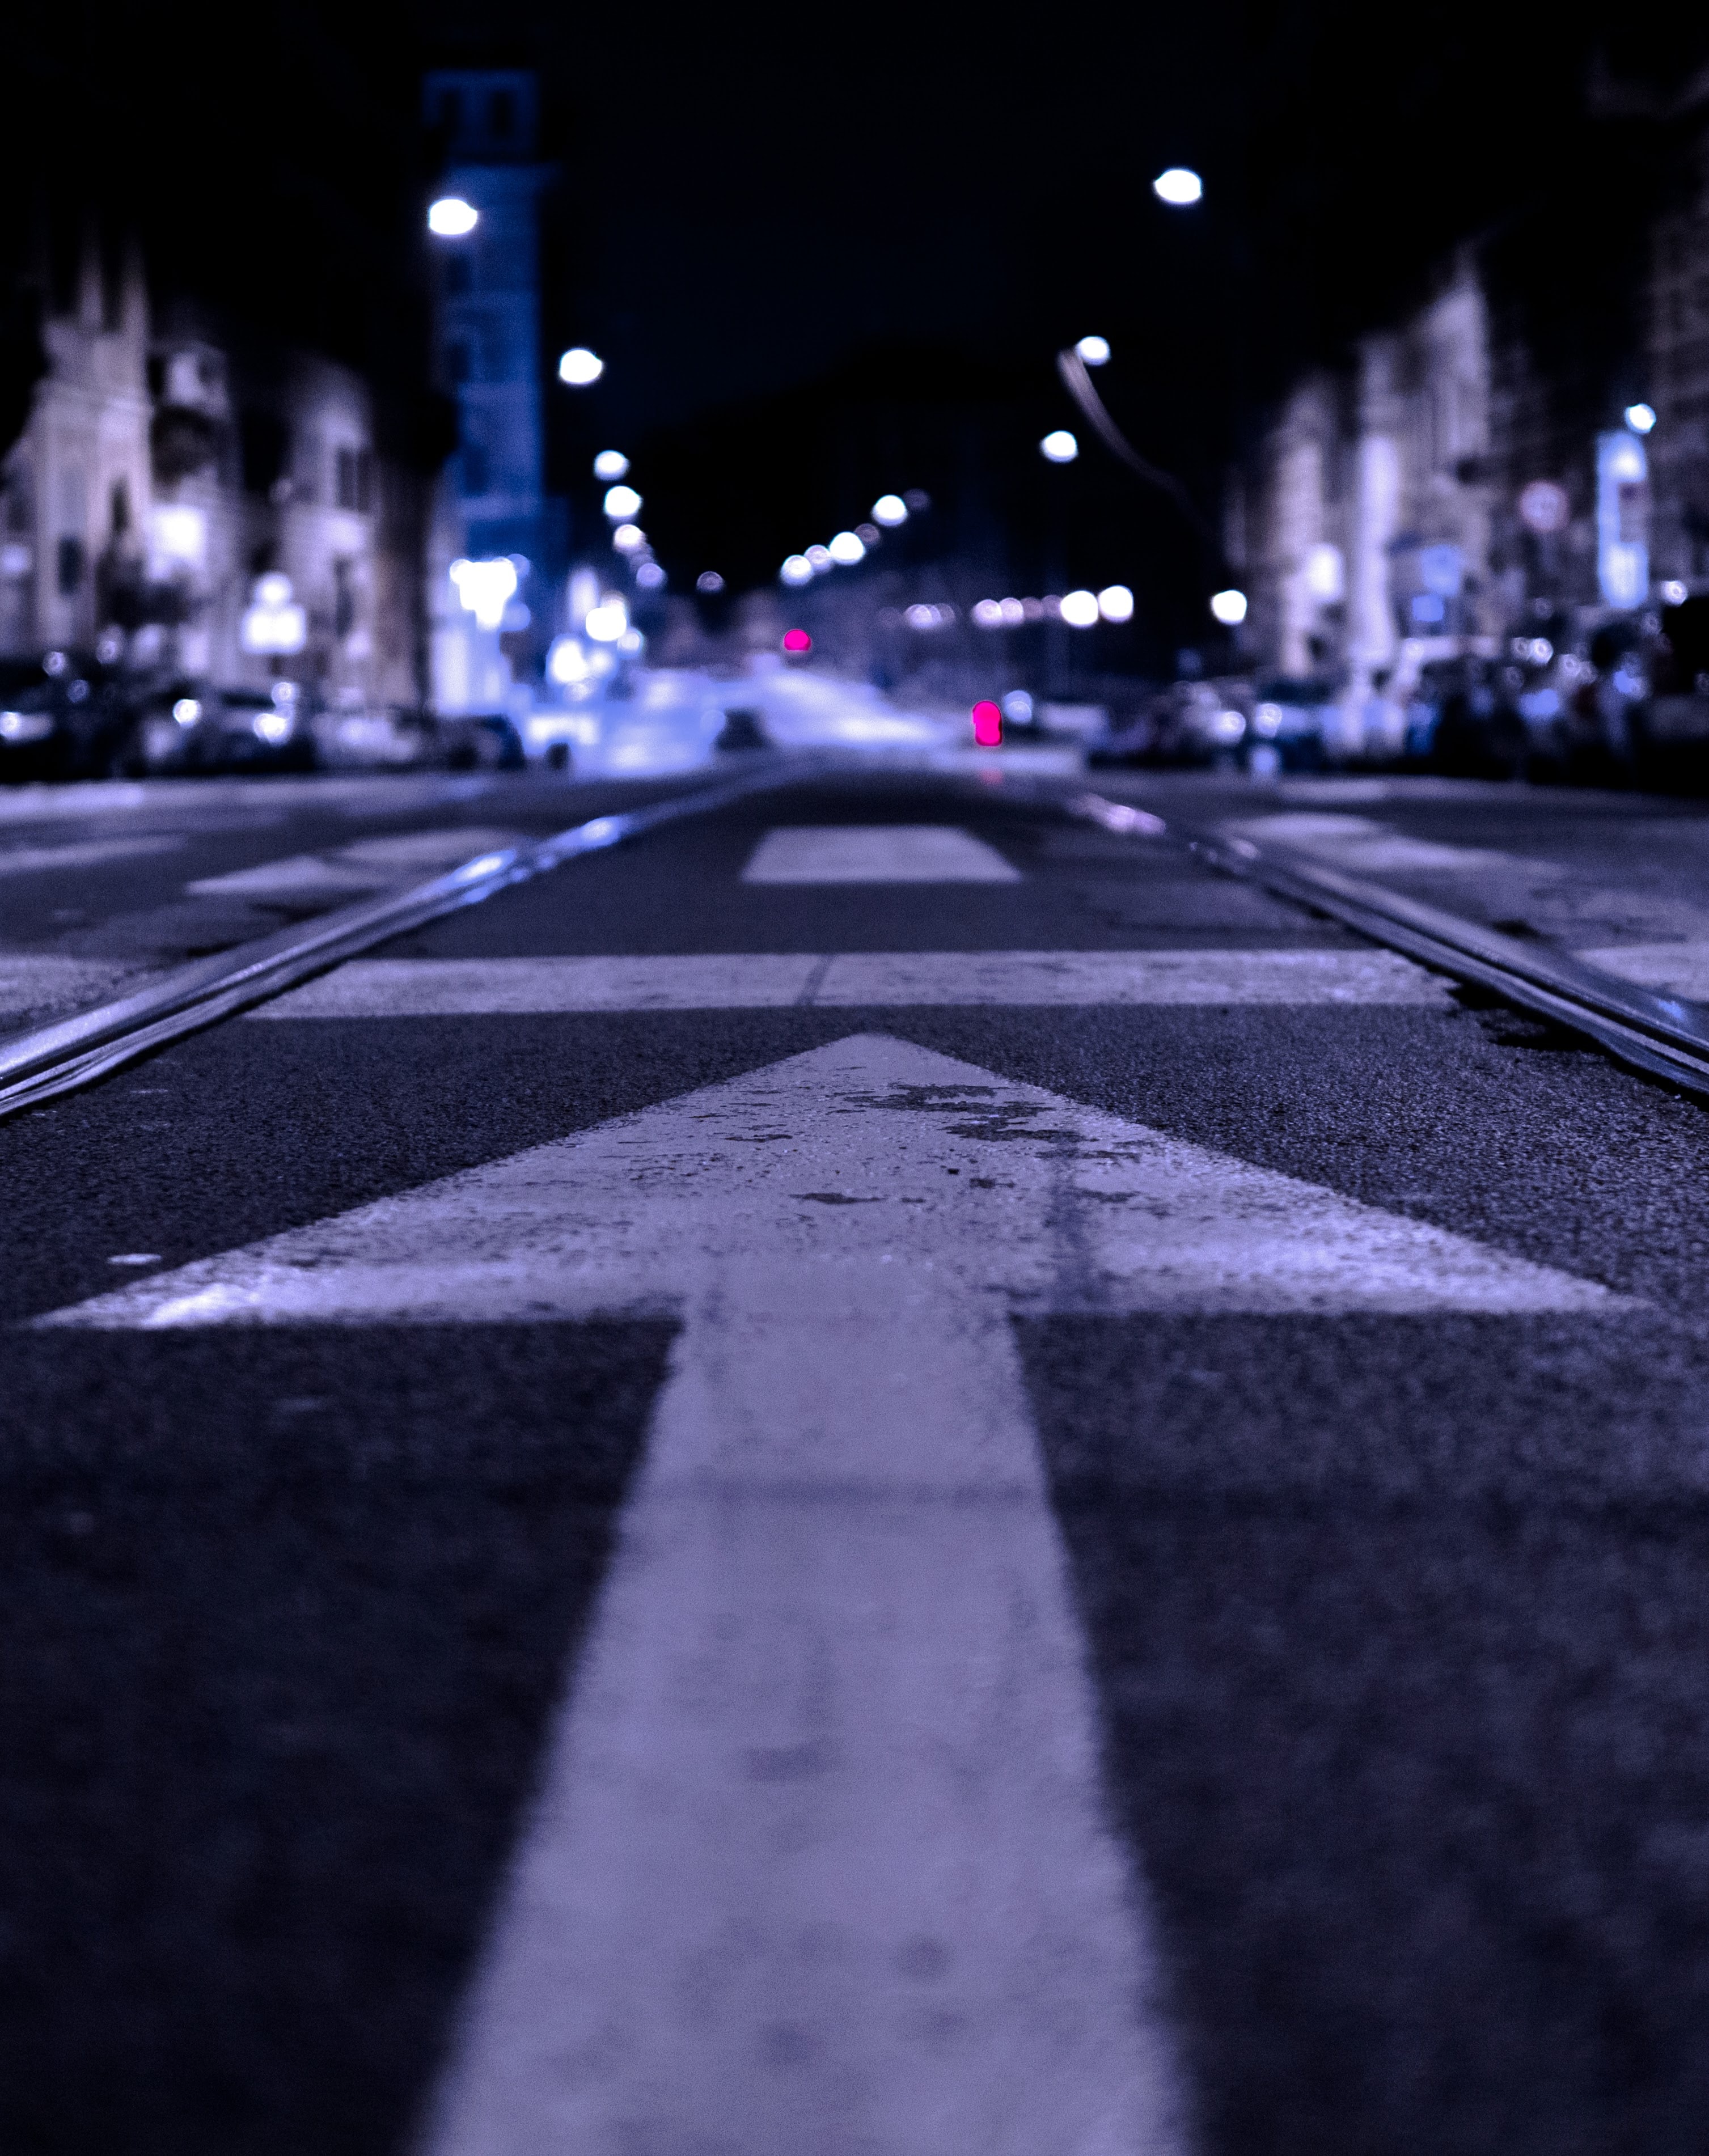 Photograph of street at night with arrow pointing forward.